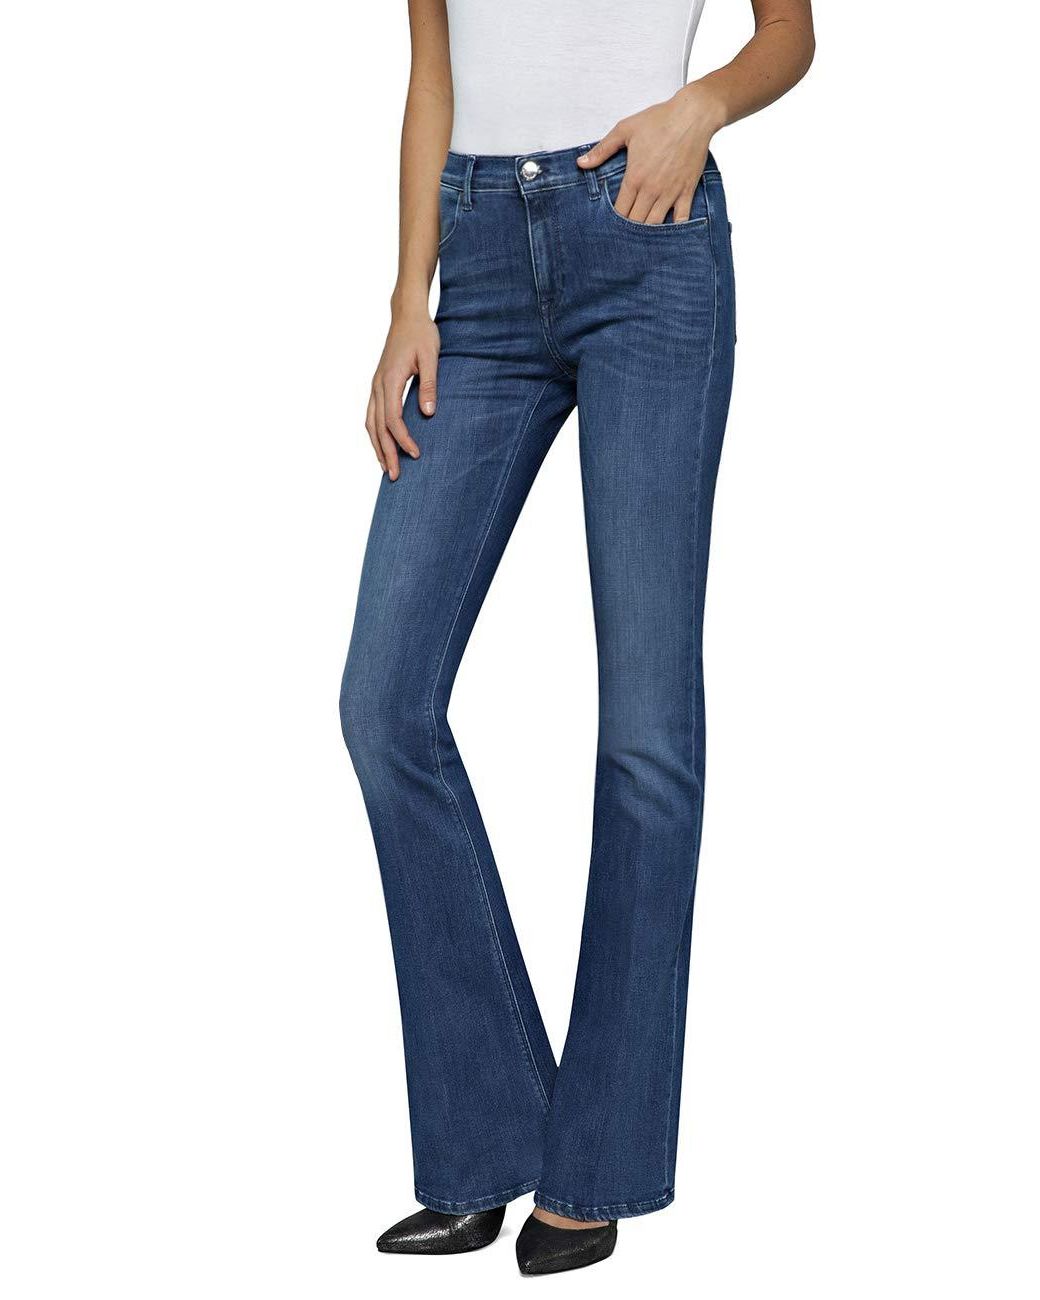 replay stella flare jeans, Replay Women's Luz Flare Jeans : Amazon.de: -  ciclomobilidade.org